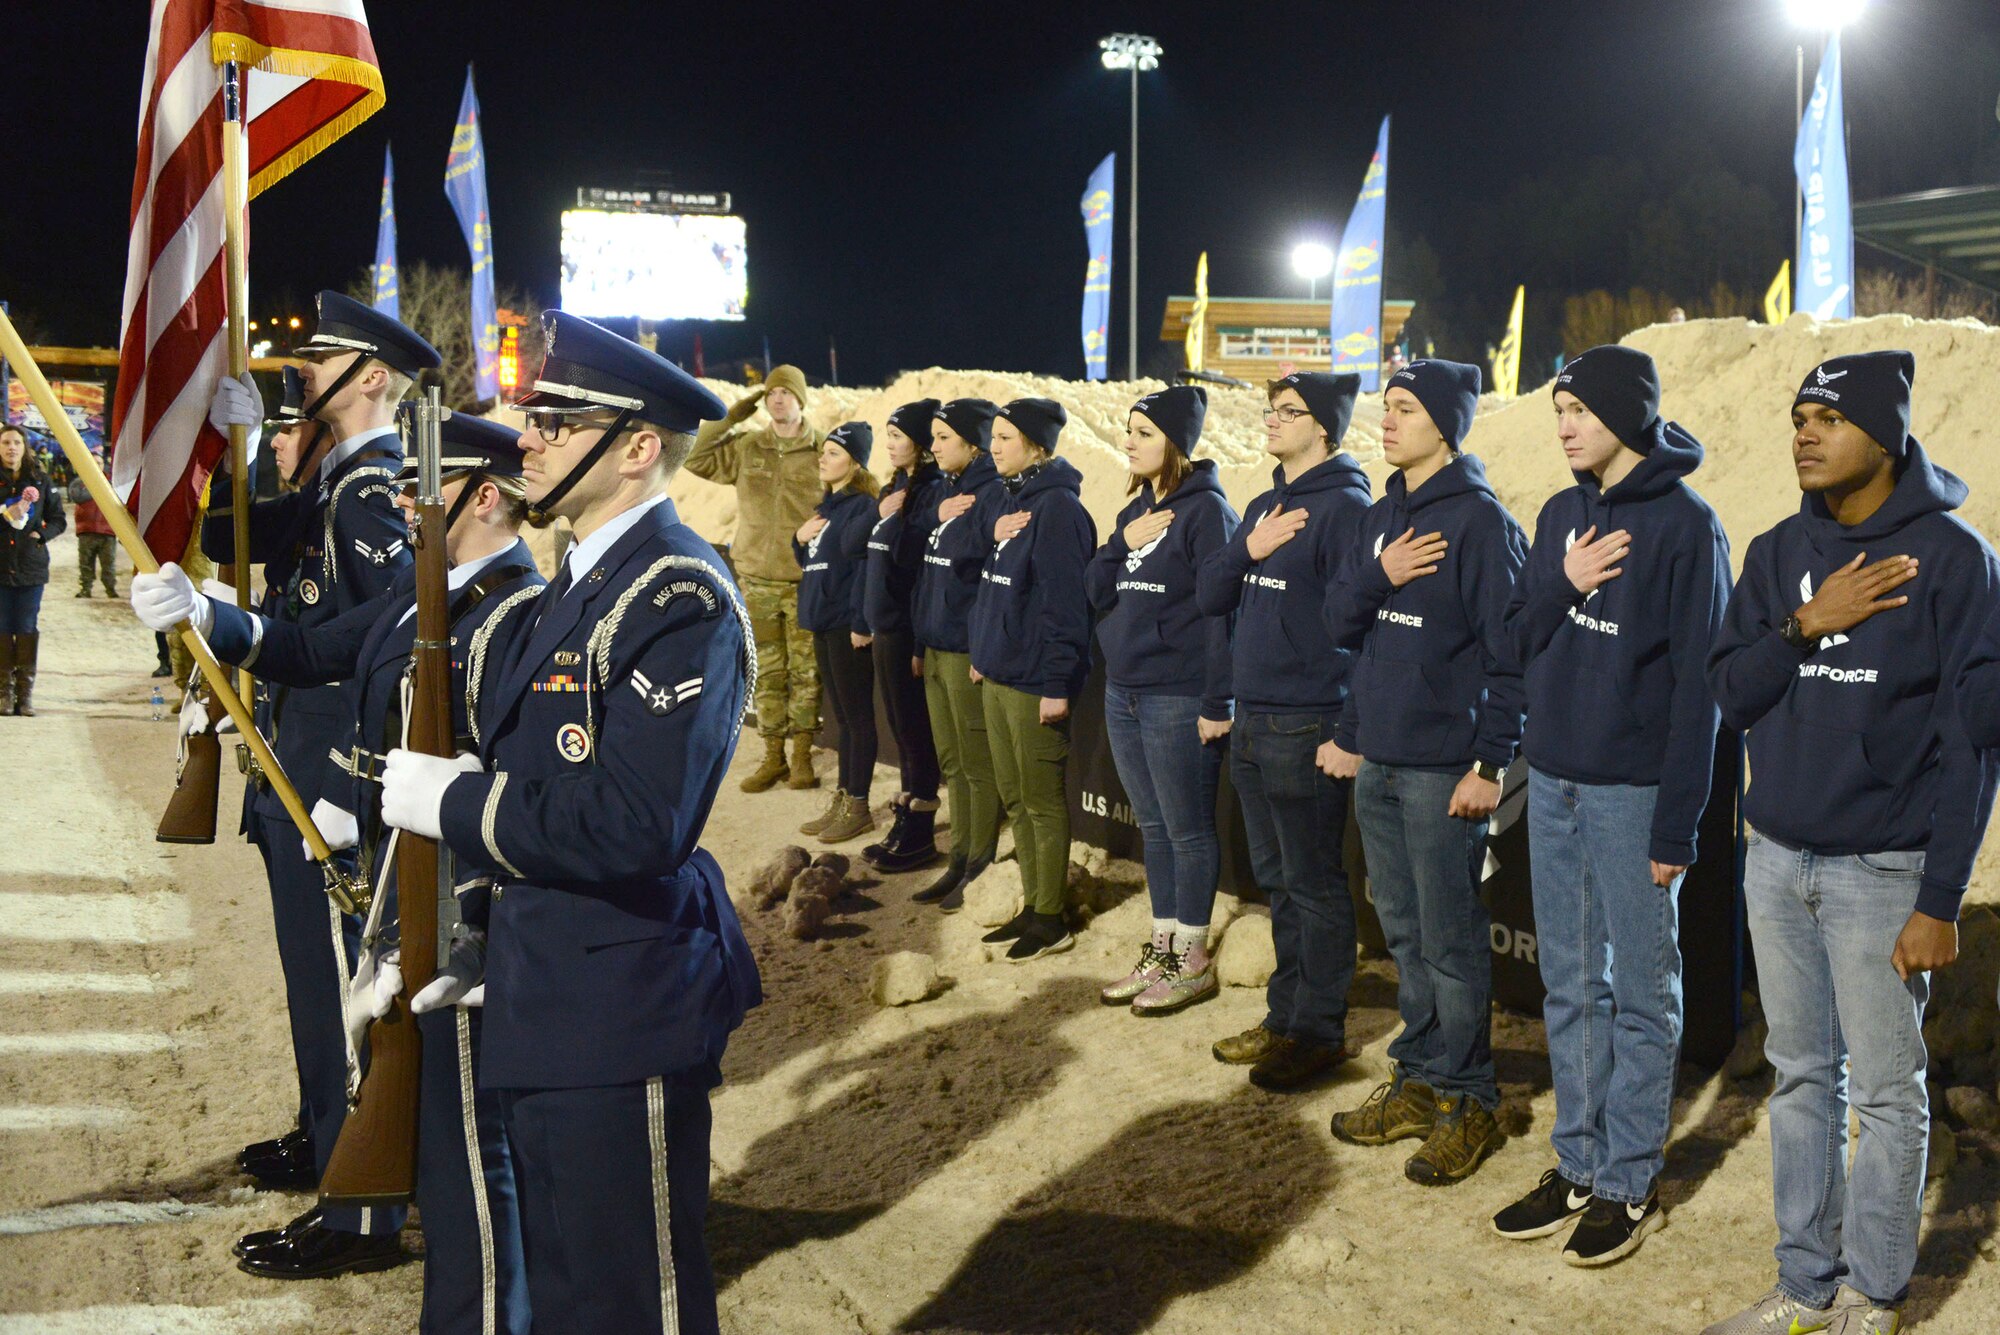 The Air Force Honor Guard team from Ellsworth Air Force Base, South Dakota and 18 new enlistees pay respect to the flag during the U.S. Air Force Snocross National in Deadwood, South Dakota.